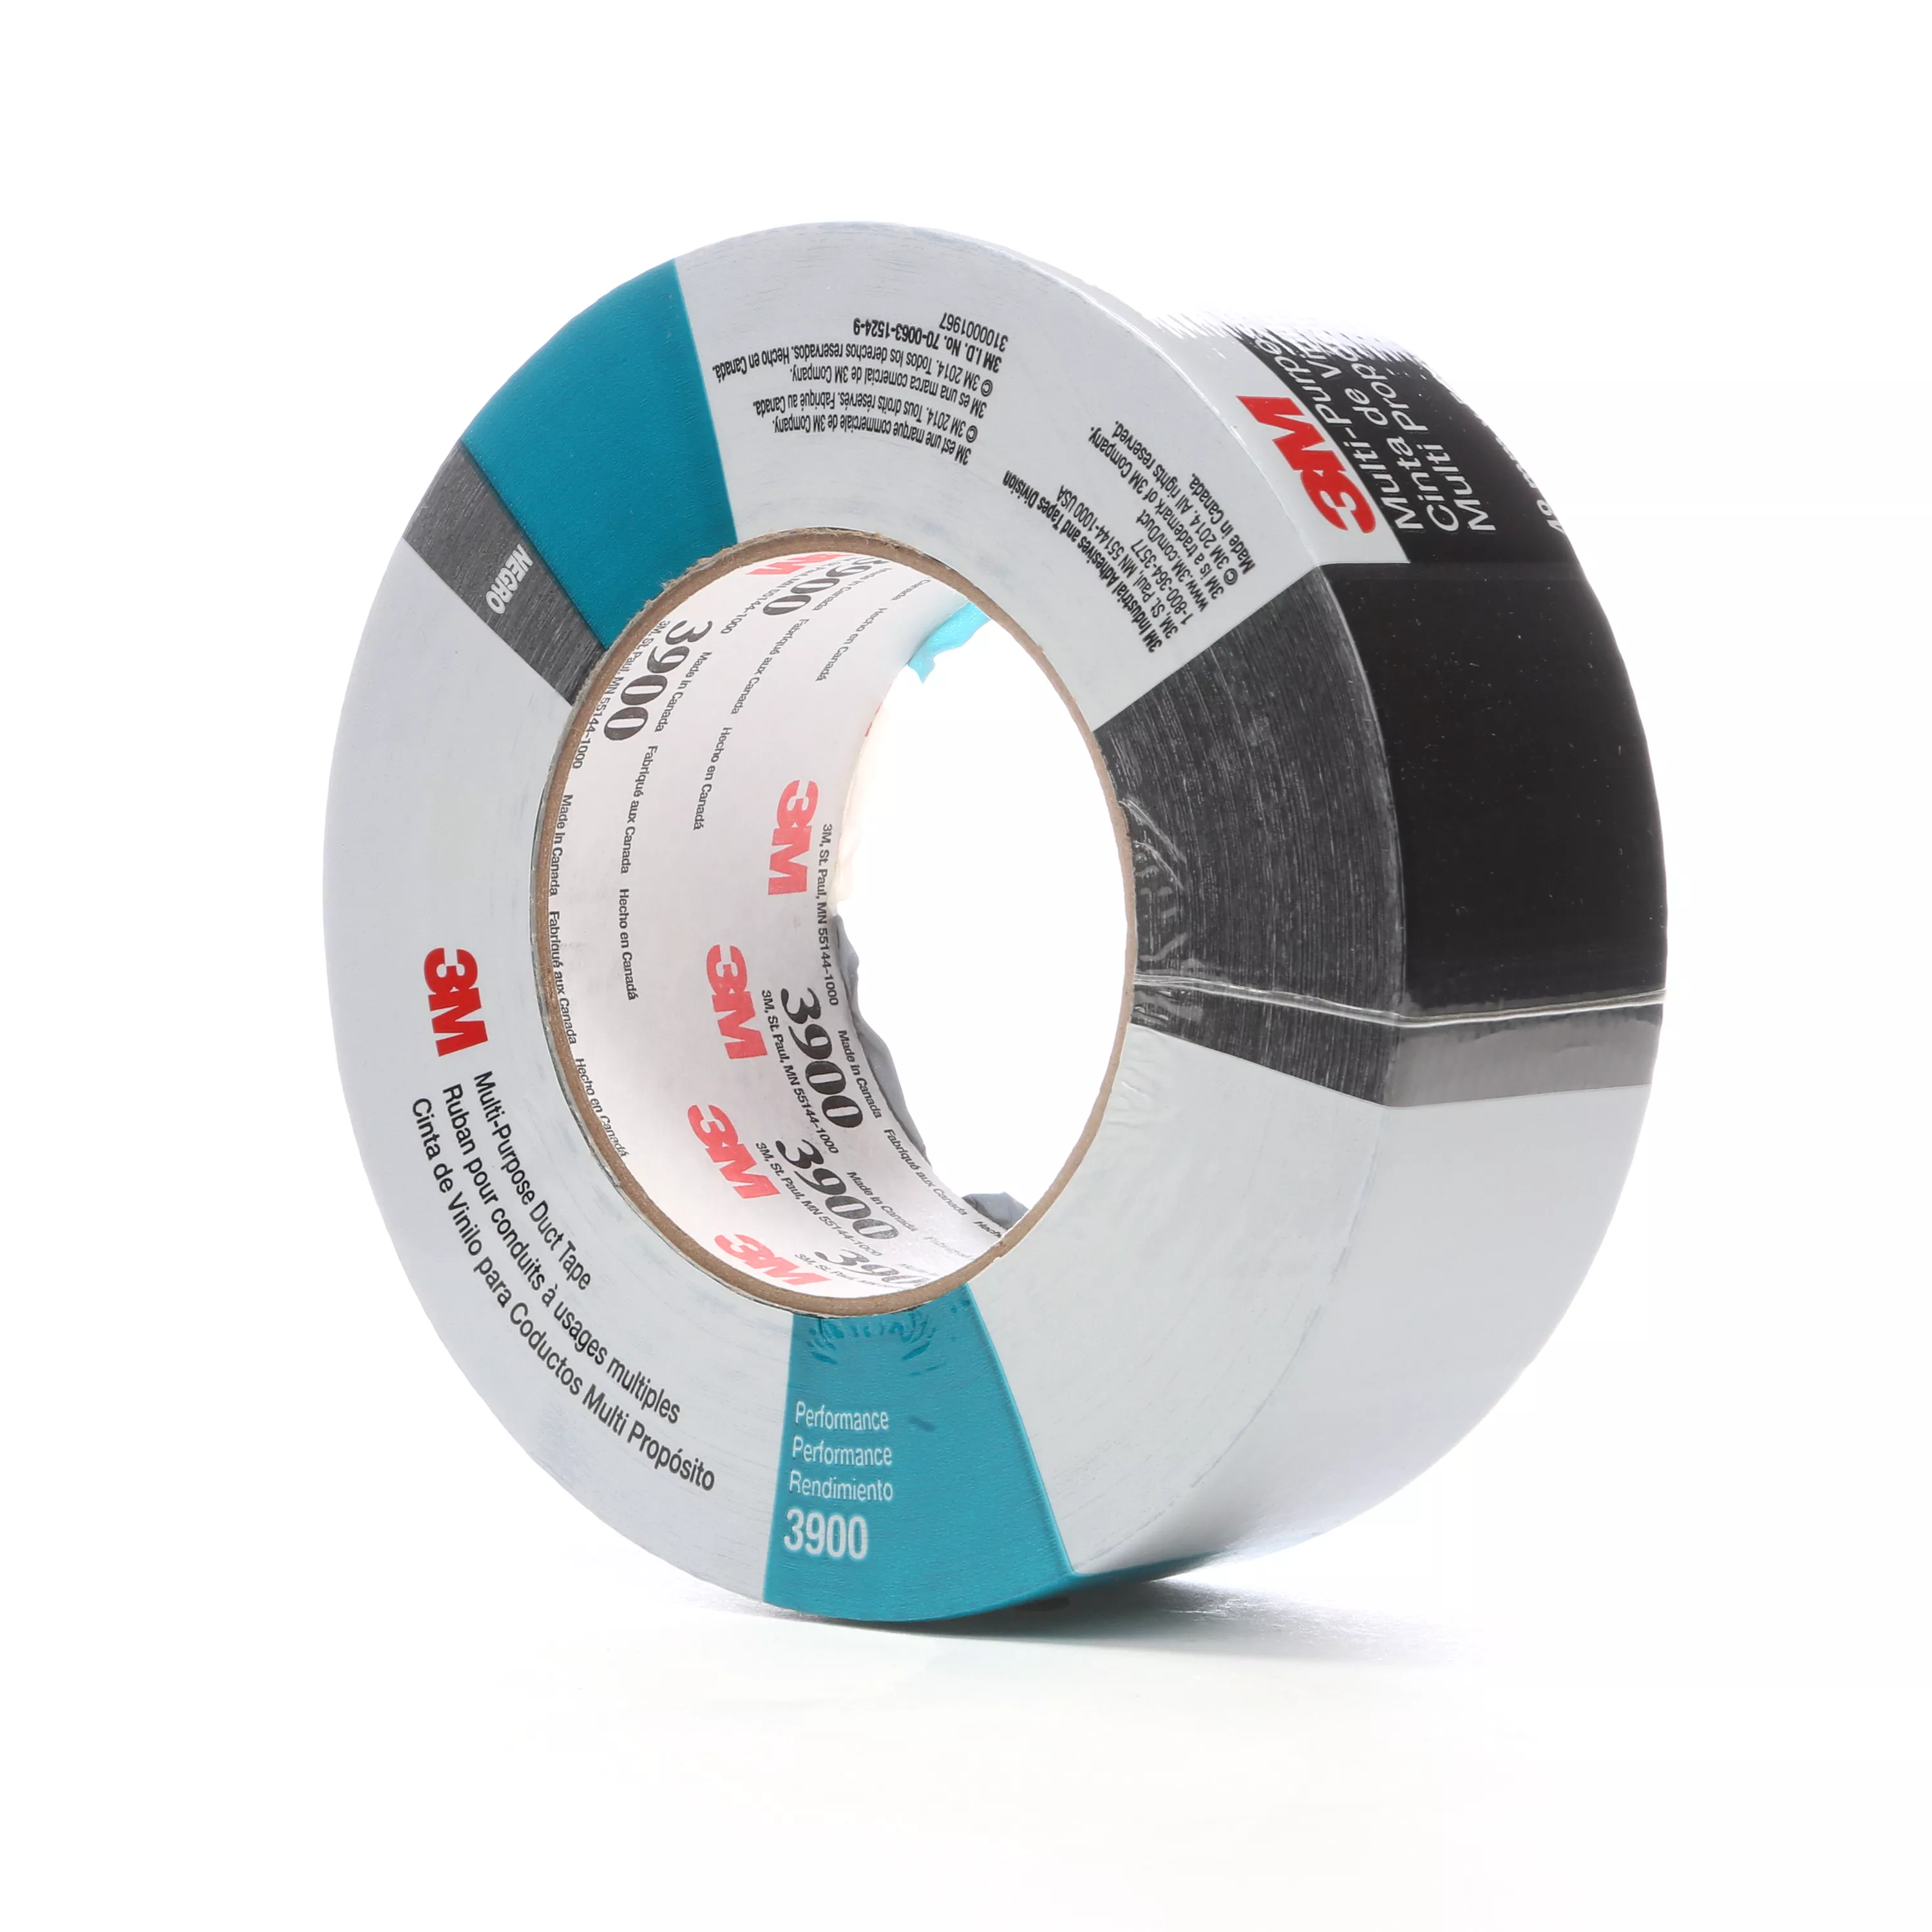 3M™ Multi-Purpose Duct Tape 3900, Black, 48 mm x 54.8 m, 7.6 mil, 24
Roll/Case, Individually Wrapped Conveniently Packaged